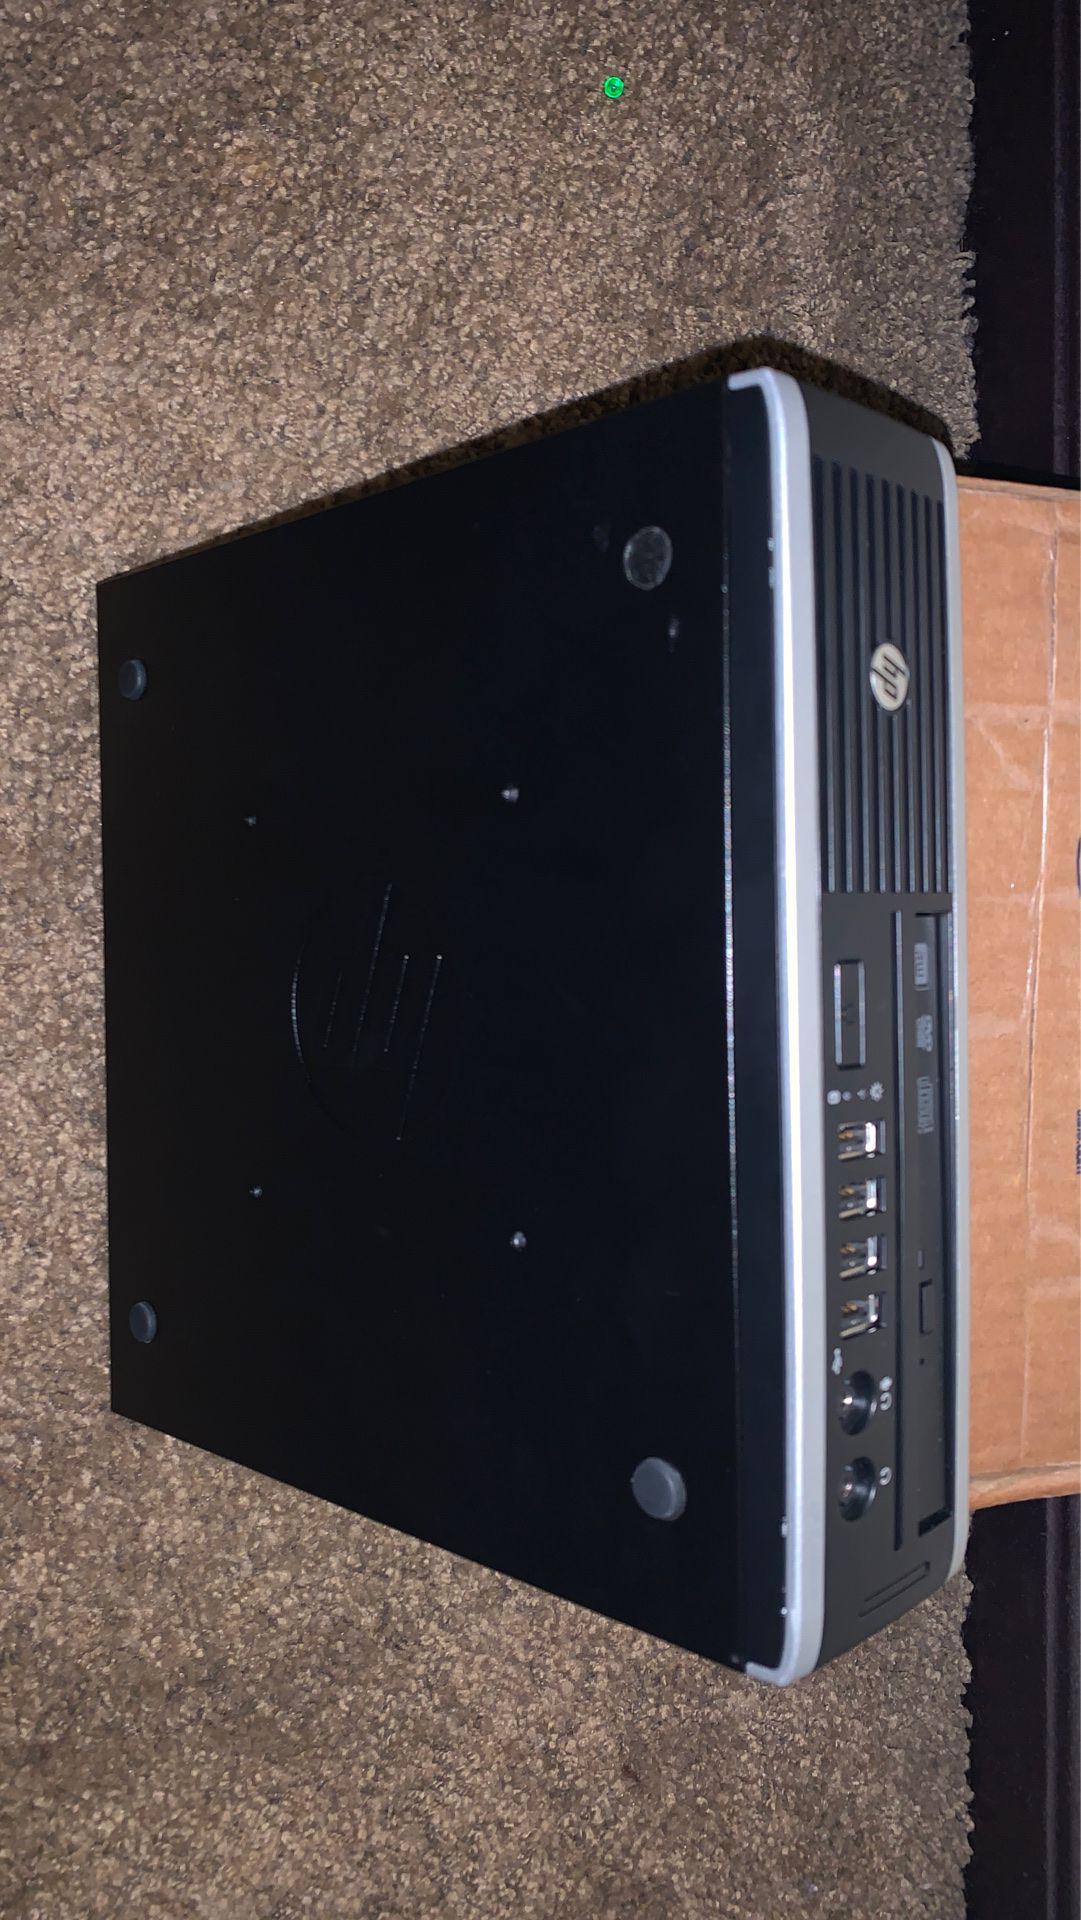 HP Elite 8300 Ultra Small Slim High Performance Business Computer PC (Intel 3470s 2.9Ghz)